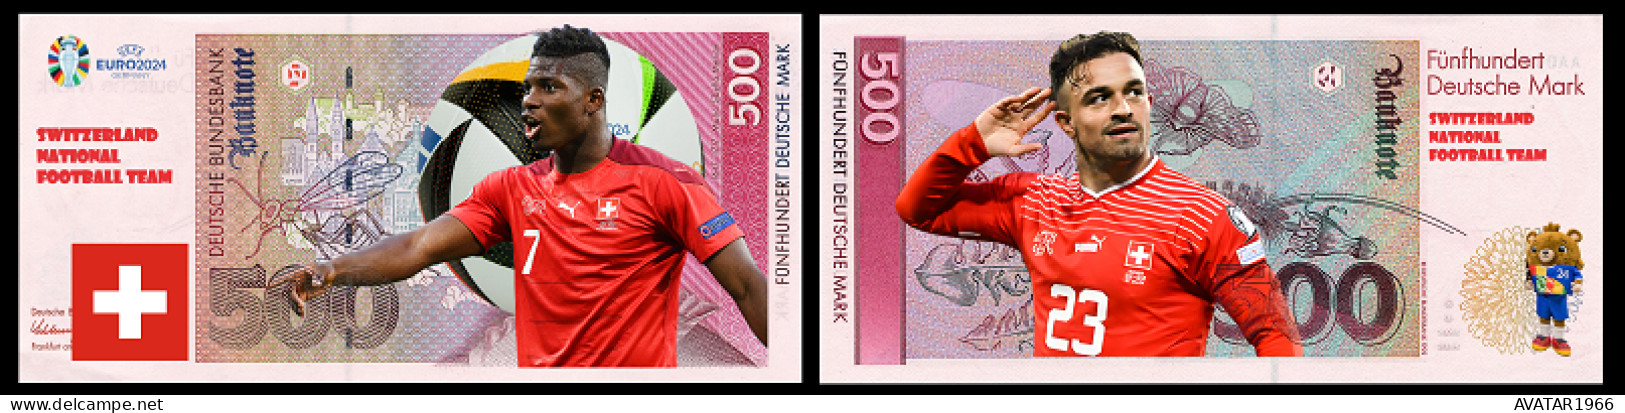 UEFA European Football Championship 2024 qualified country Switzerland 8 pieces Germany fantasy paper money